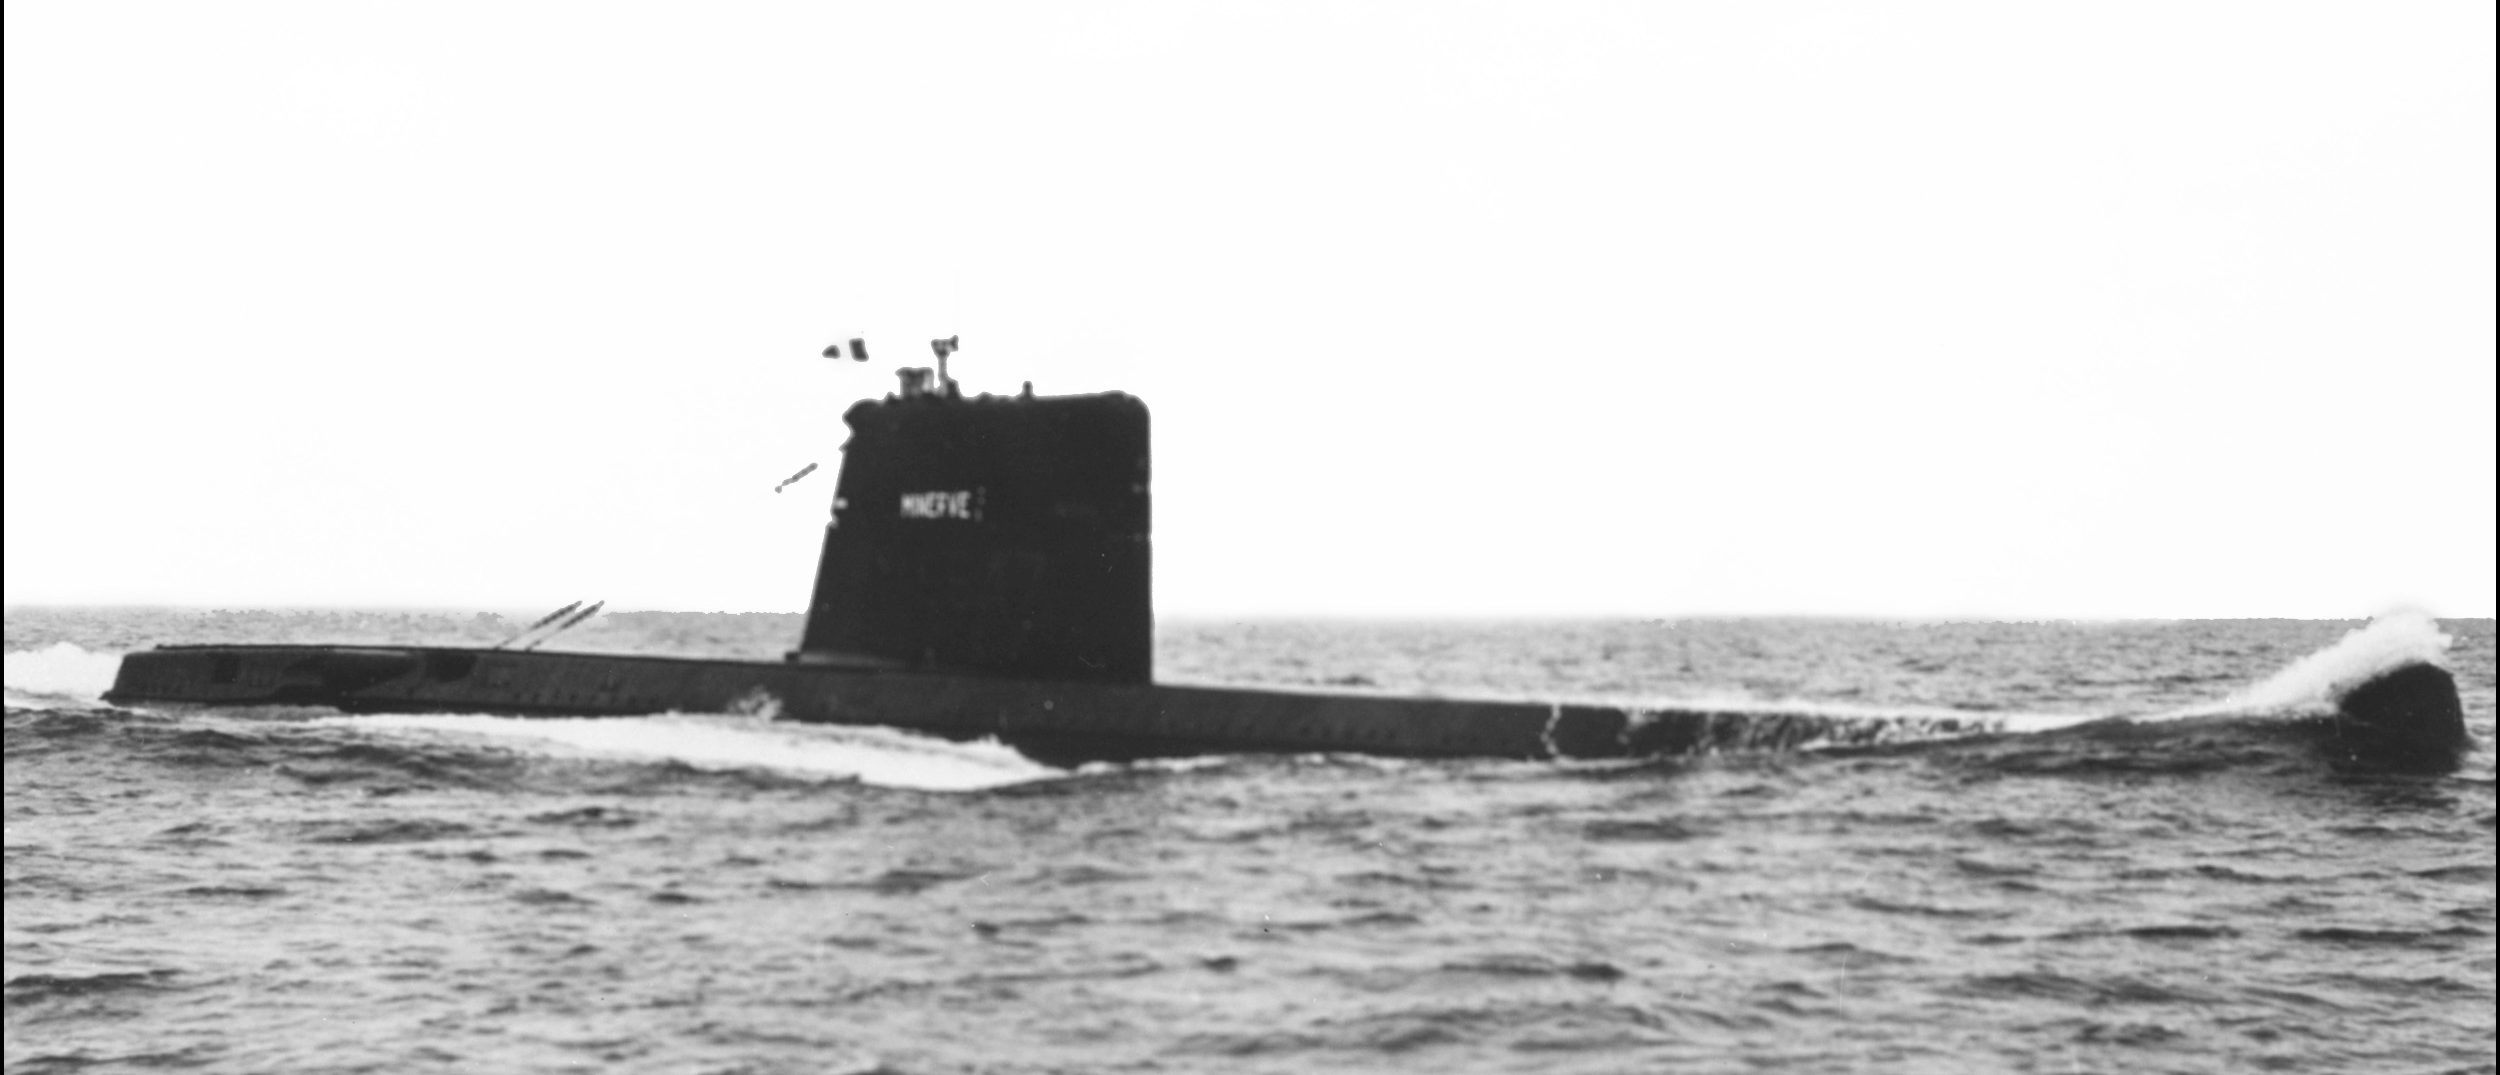 Search Team Finds French Submarine More Than 50 Years After Disappearance | The Daily ...